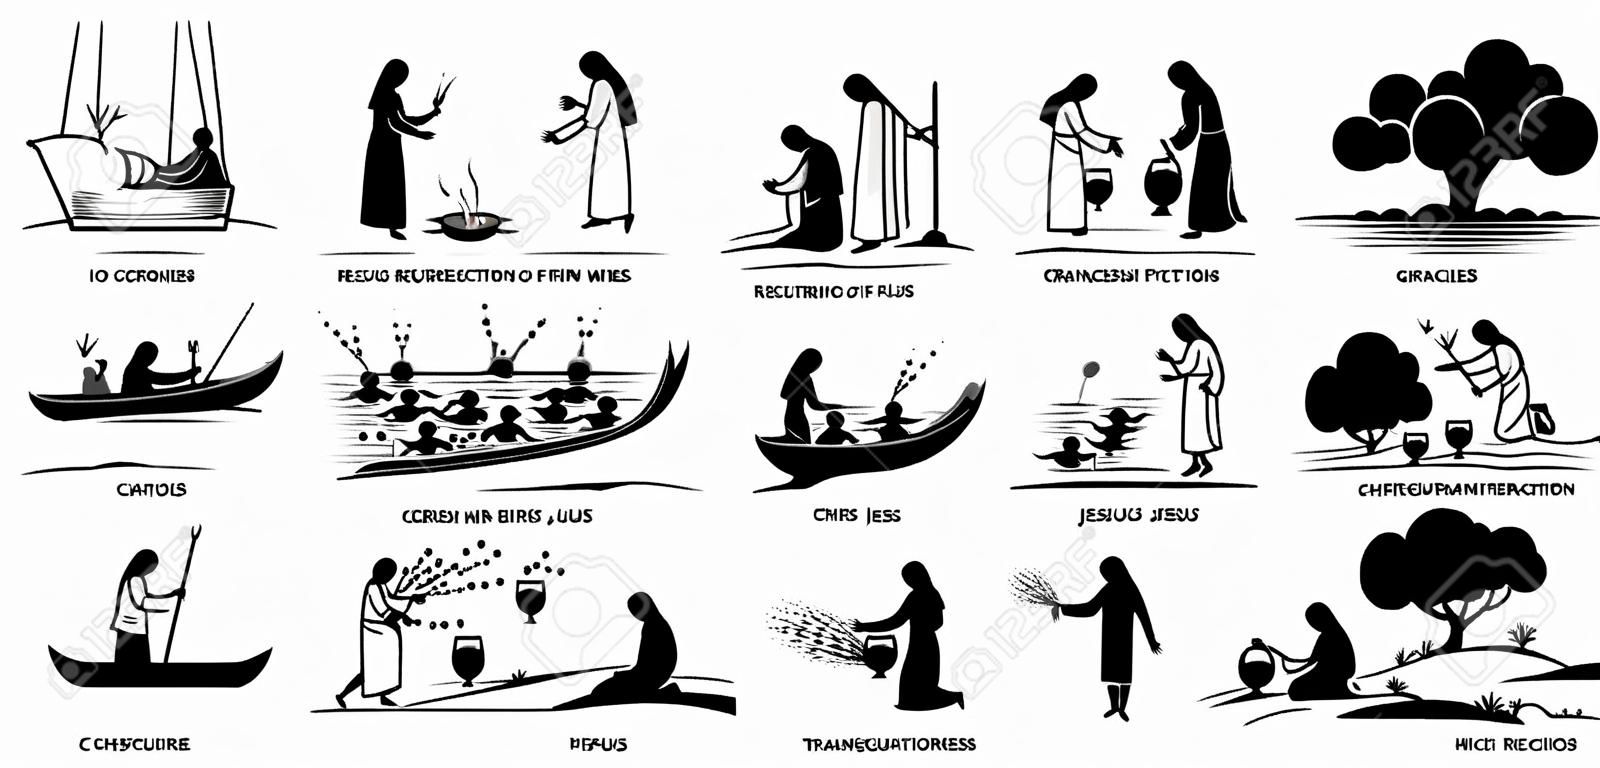 Miracles of Jesus Christ icons pictogram. Stick figure of Jesus Christ curing blind, woman, turning water to wine, exorcism, resurrection, catch fish, walking on water, feeding, and transfiguration.